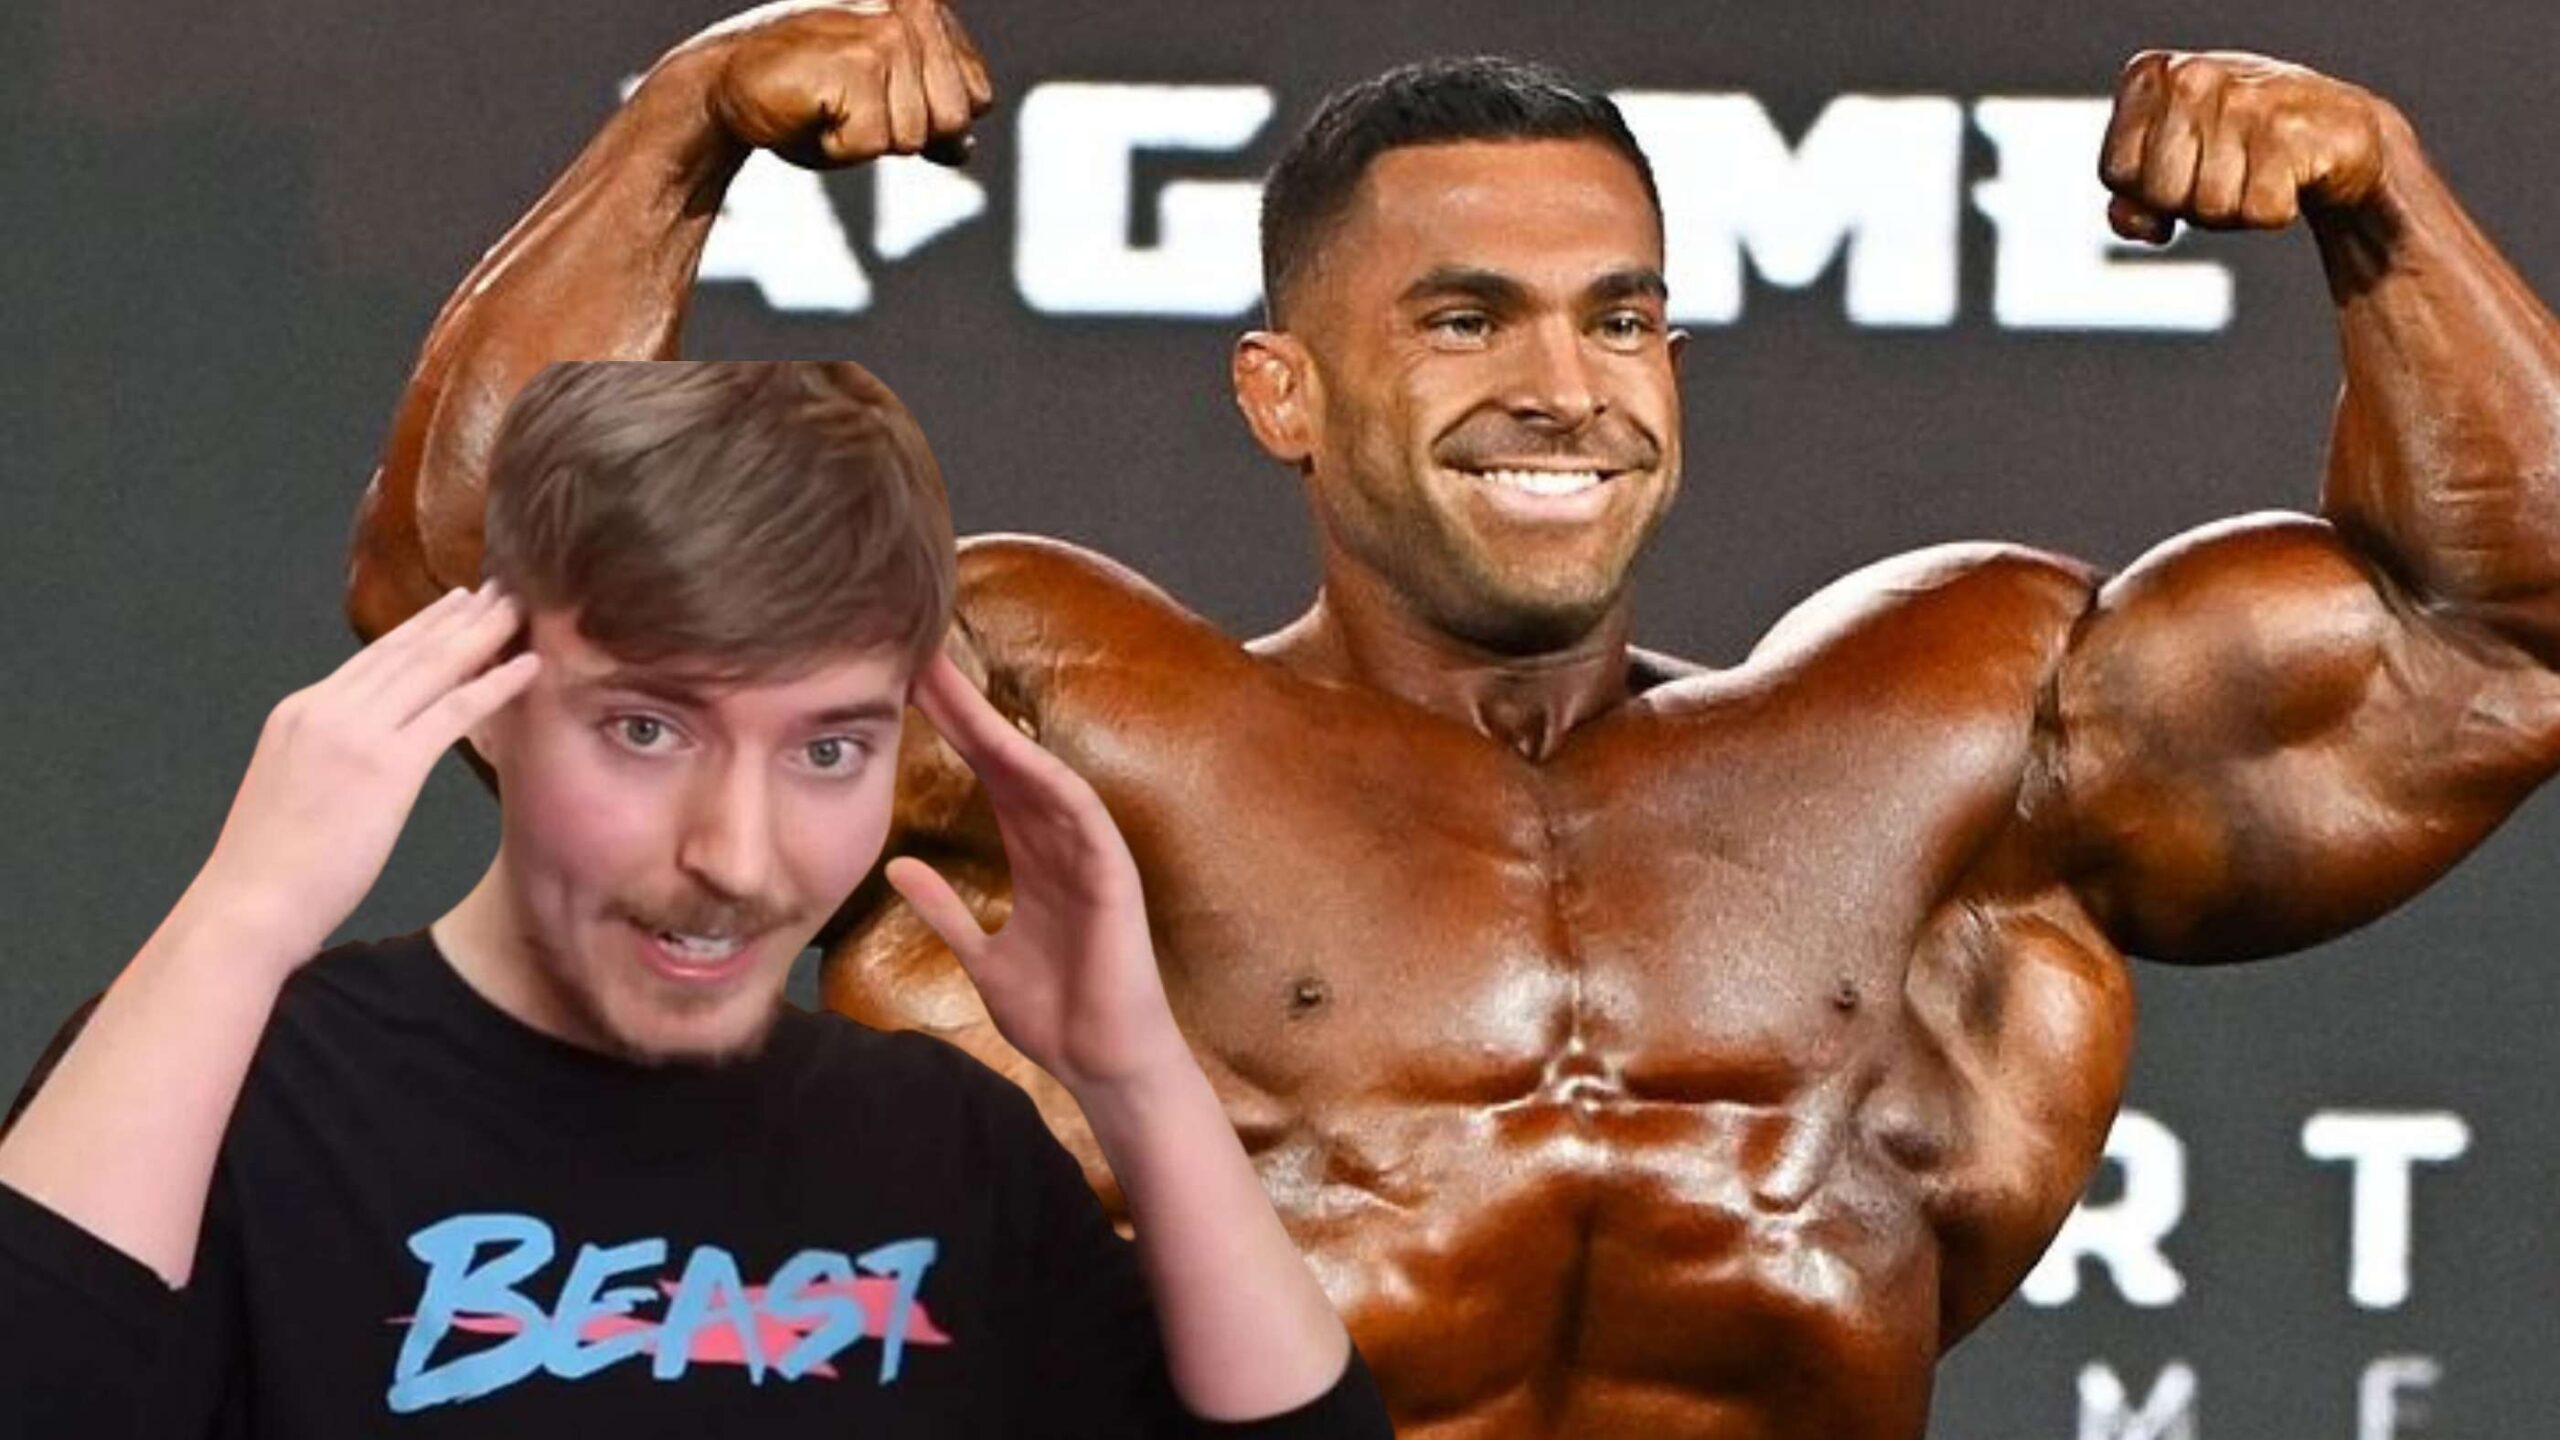 MrBeast Amazed by Mr. Olympia Derek Lunsford's Posing: "Lunsford’s arm size is more massive than my entire body"